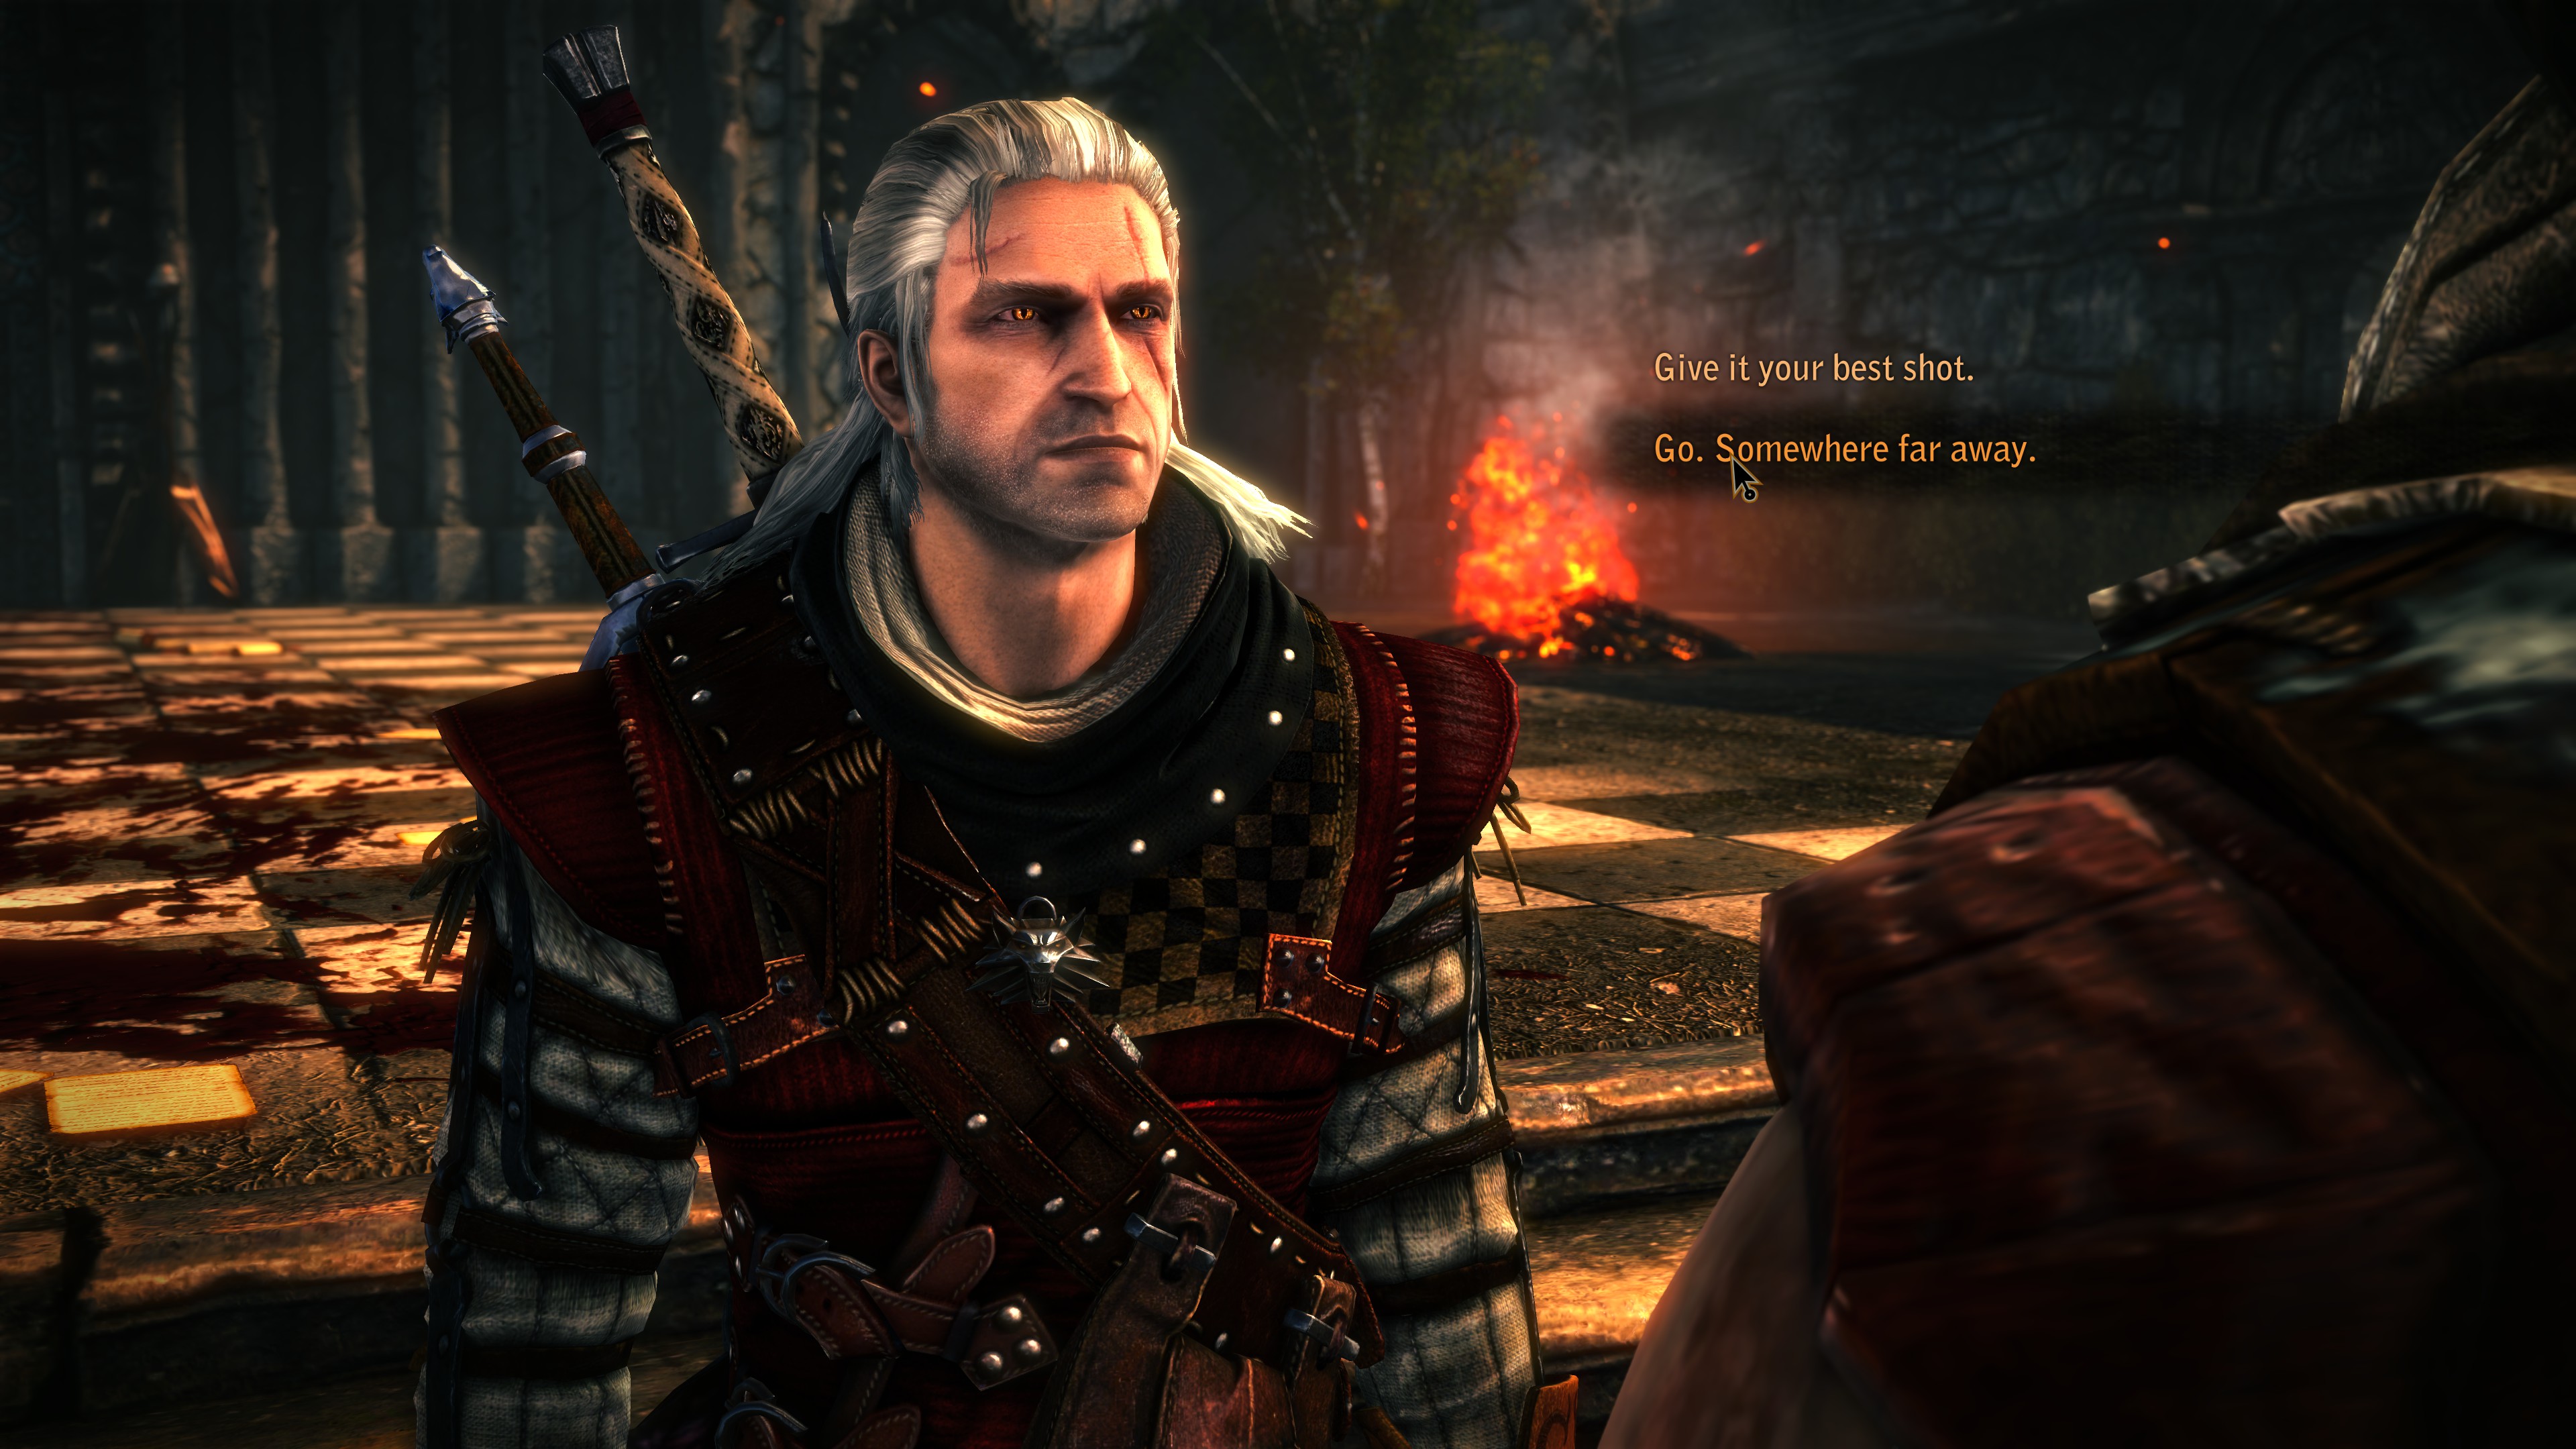 How The Witcher 2 almost never happened - Polygon